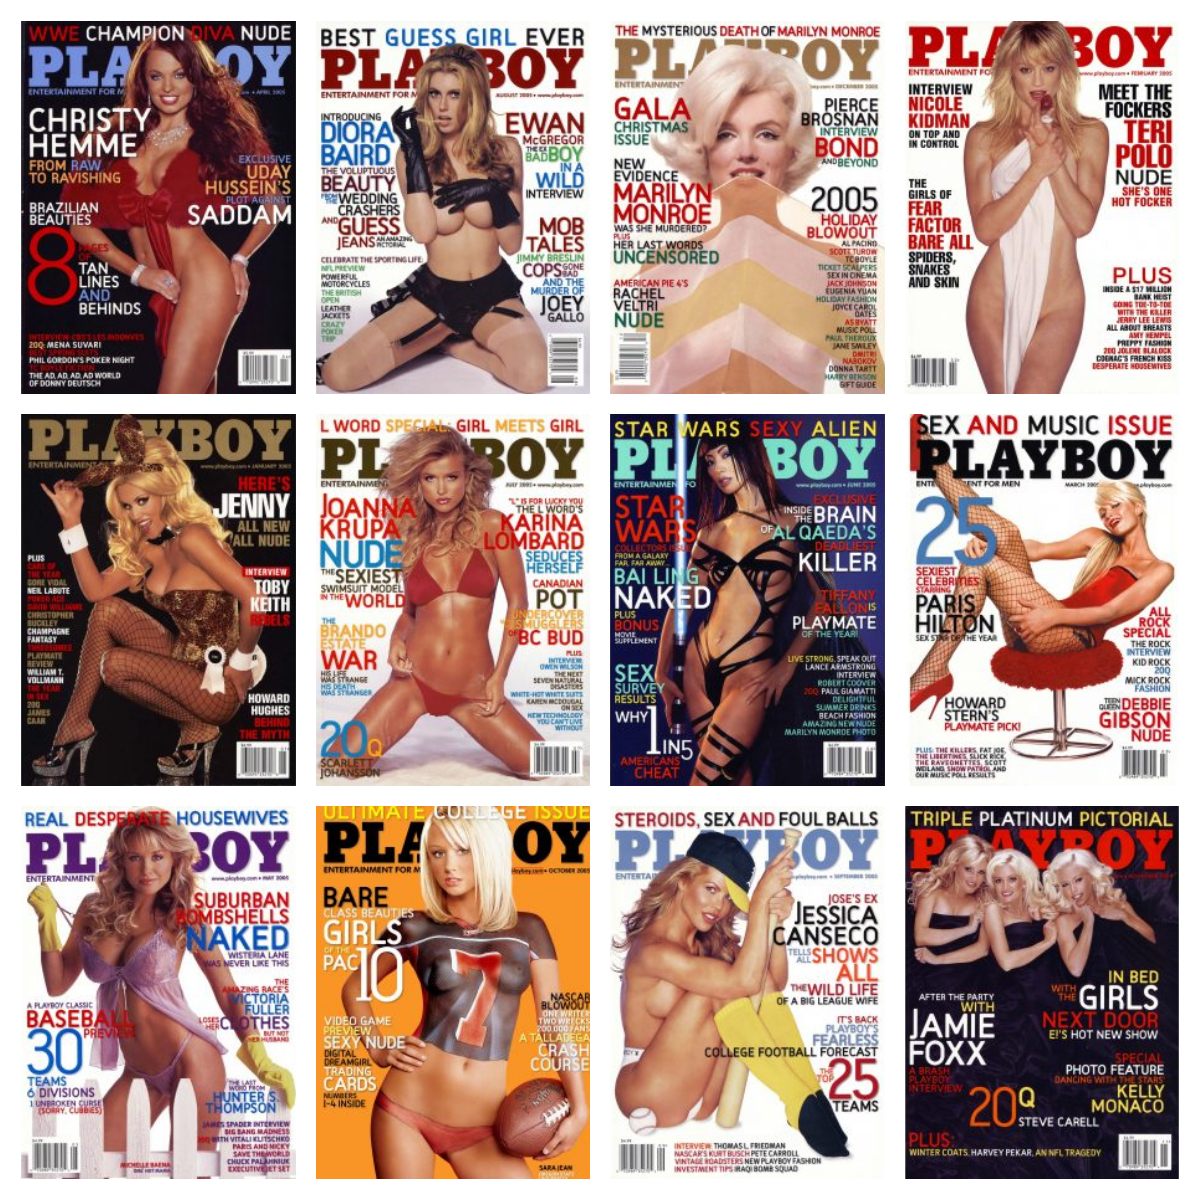 Playboy USA – Full Year 2005 Issues Collection